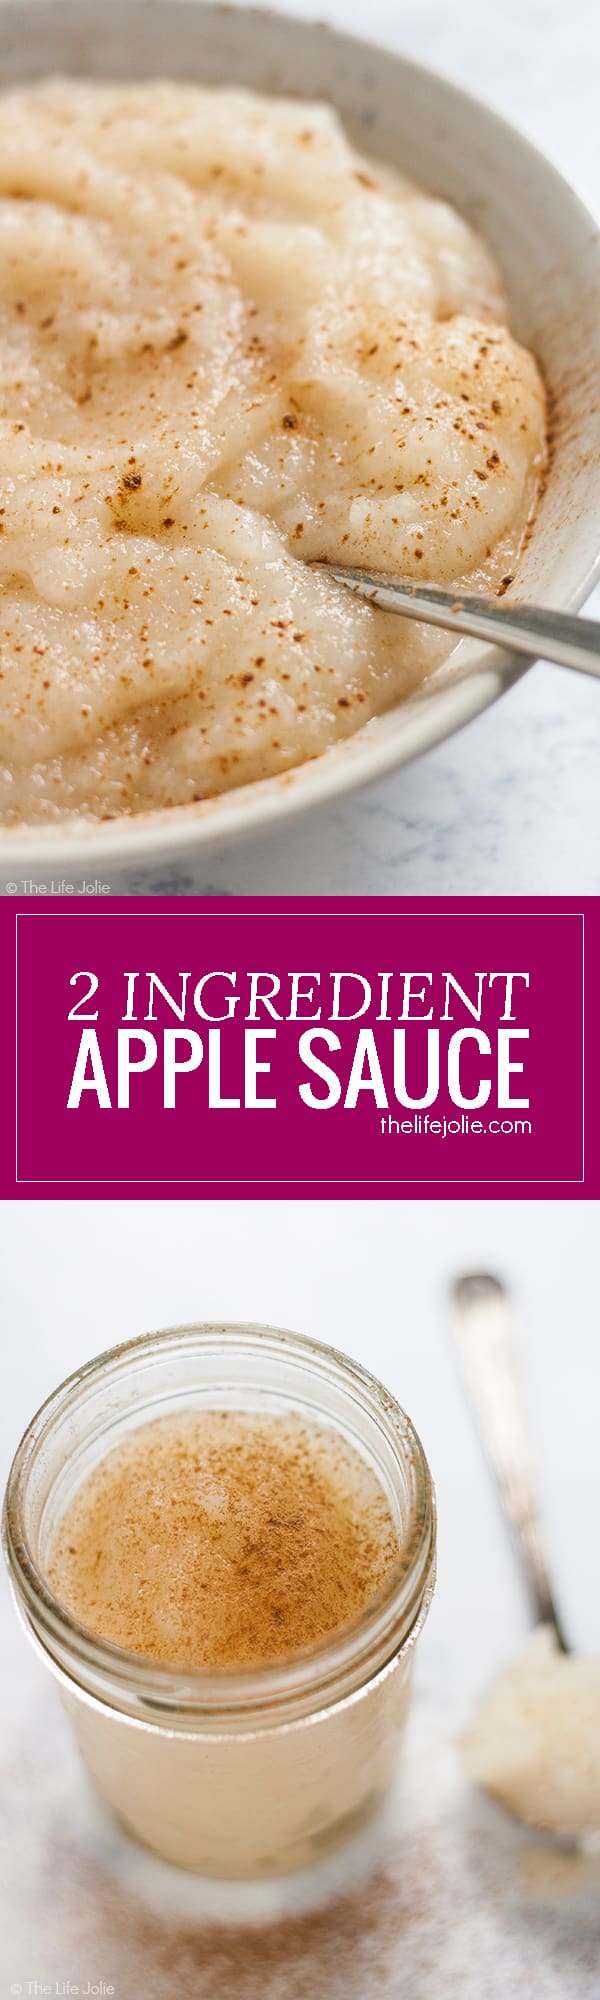 This homemade 2 Ingredient Applesauce is one of quickest and most easy recipes ever! The is no sugar added which makes it super healthy and it has plenty of uses! My whole family loves it!